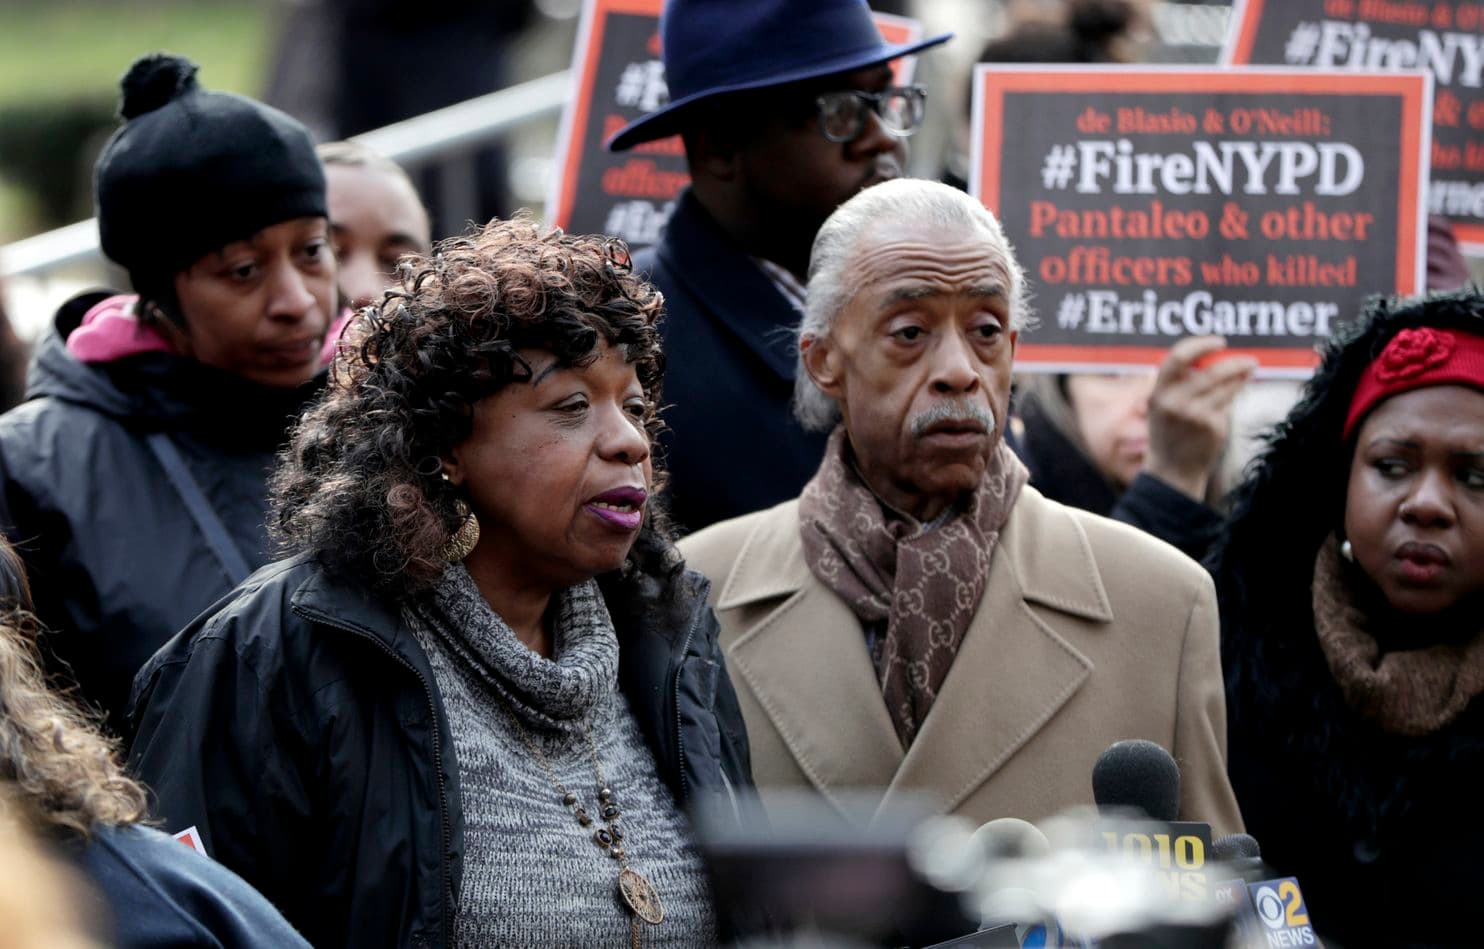 Rev. Sharpton and Gwen Carr, mother of Eric Garner, at press conference following disciplinary hearing for Eric Garner's killer, with signs denouncing NYPD in background.